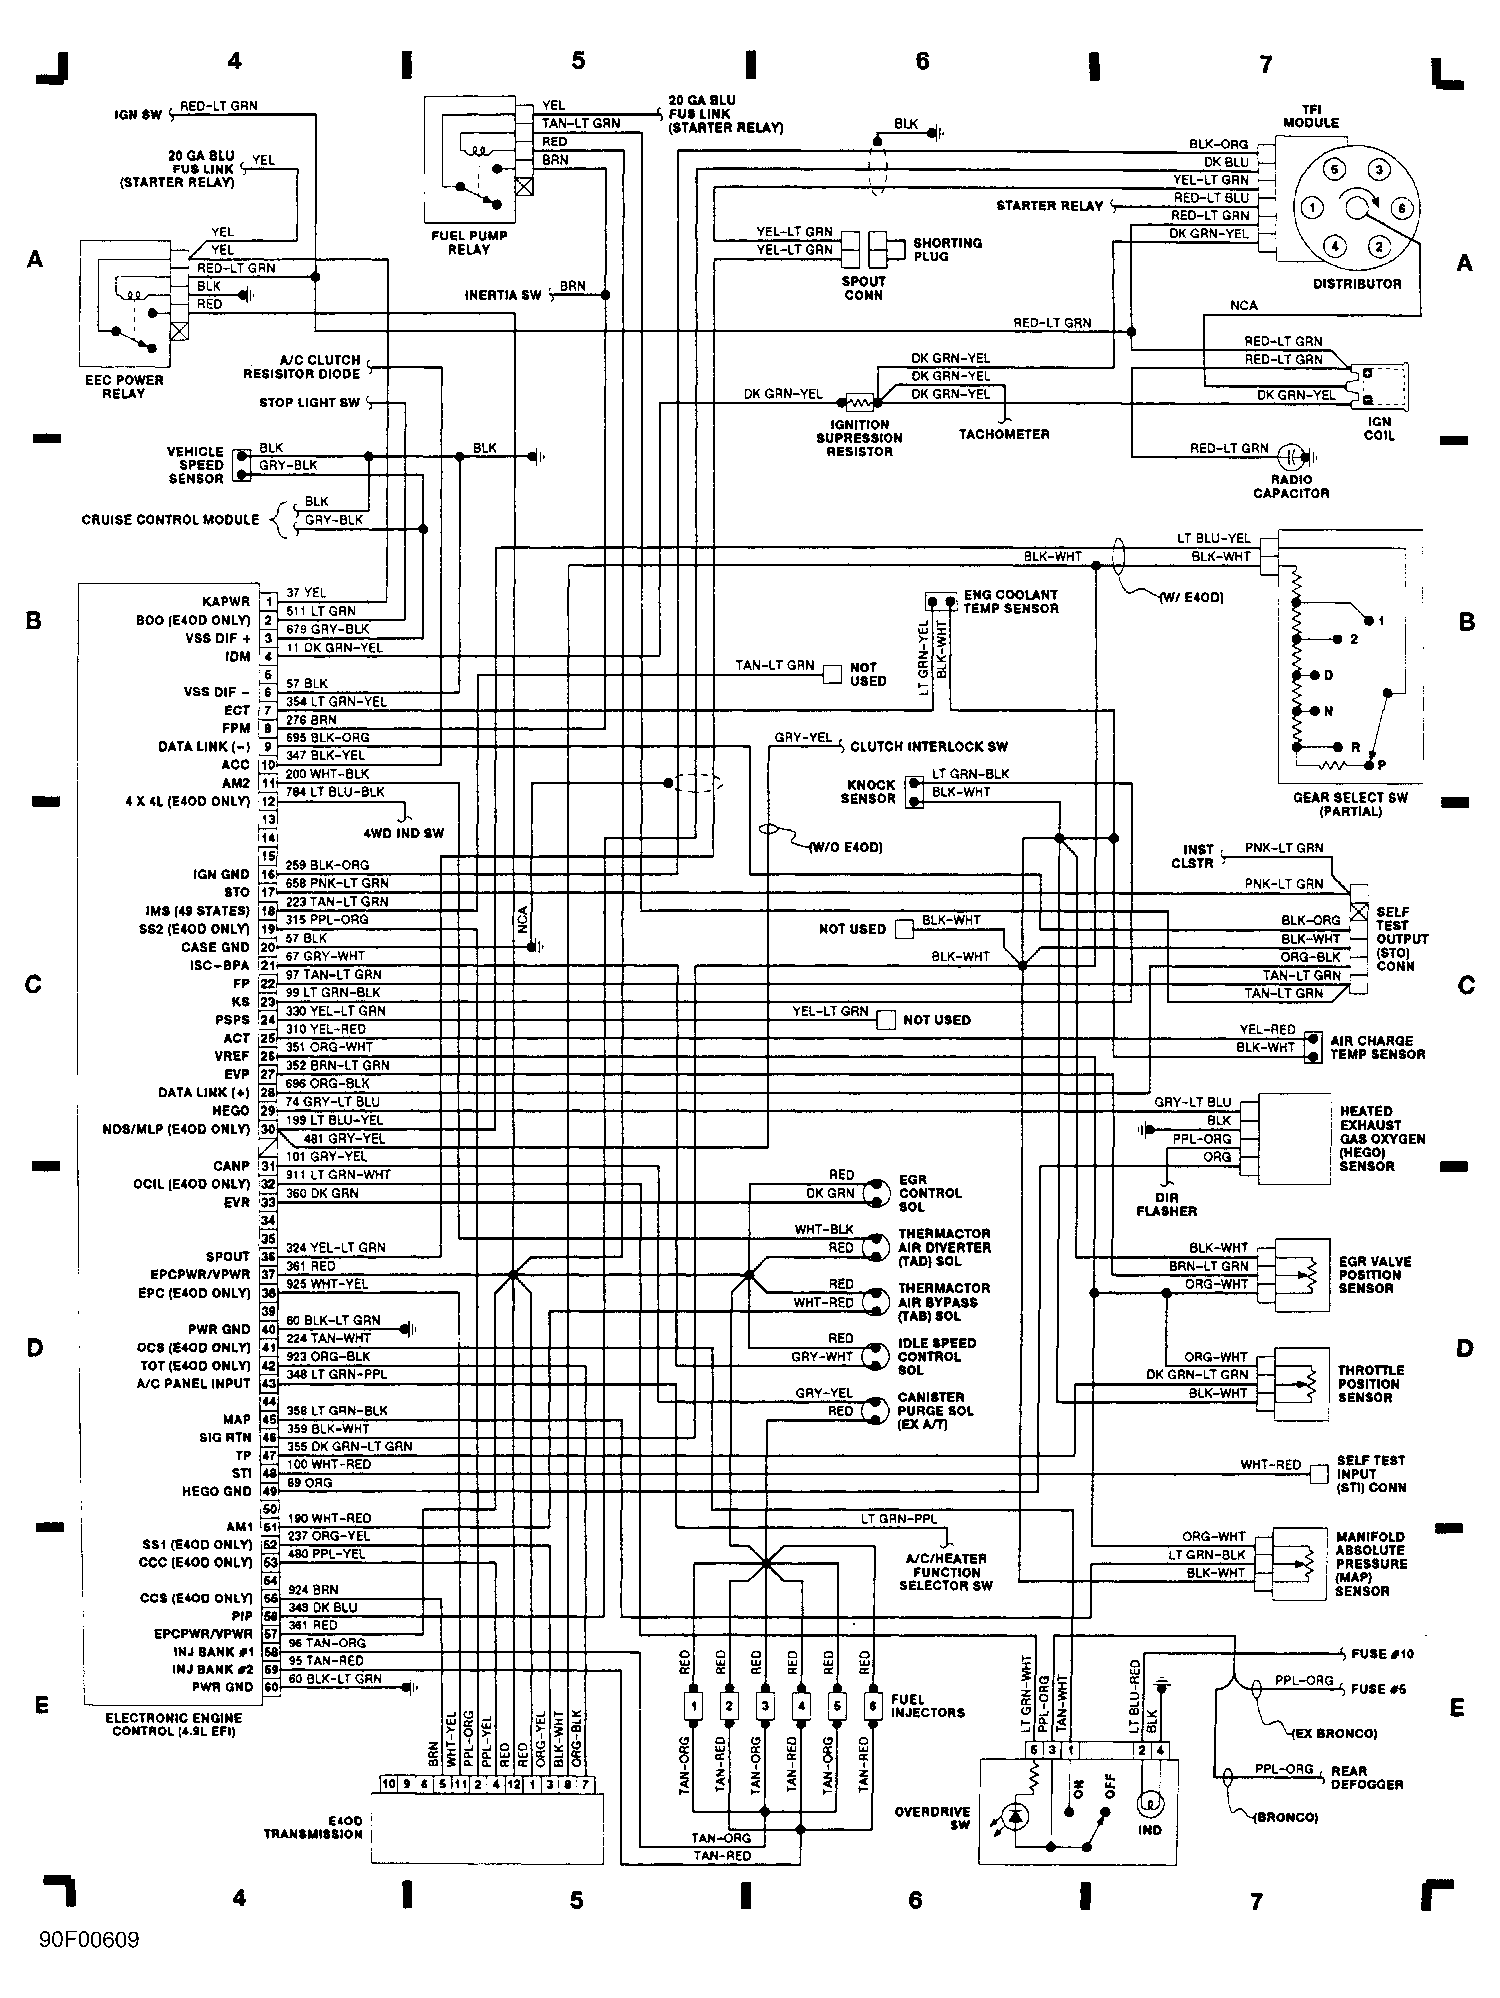 Engine Harness Diagram 4 9 Ford Truck